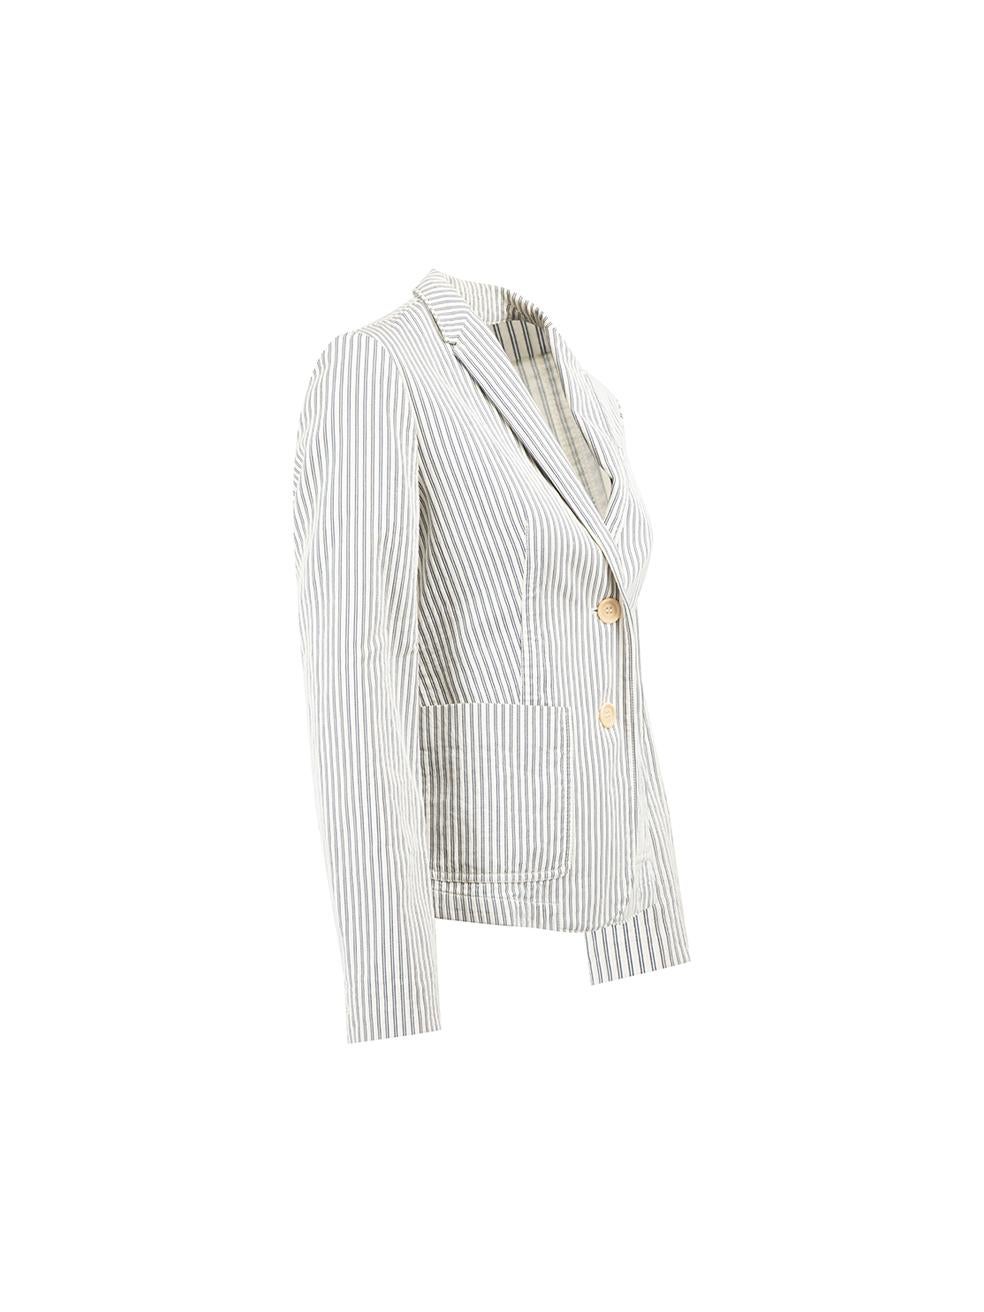 CONDITION is Very good. Minimal wear to blazer is evident. Minimal wear to rear neckline lining with faint discolouration on this used Burberry Brit designer resale item.



Details


Ivory with blue stripes

Single breasted

Button fastening

Long